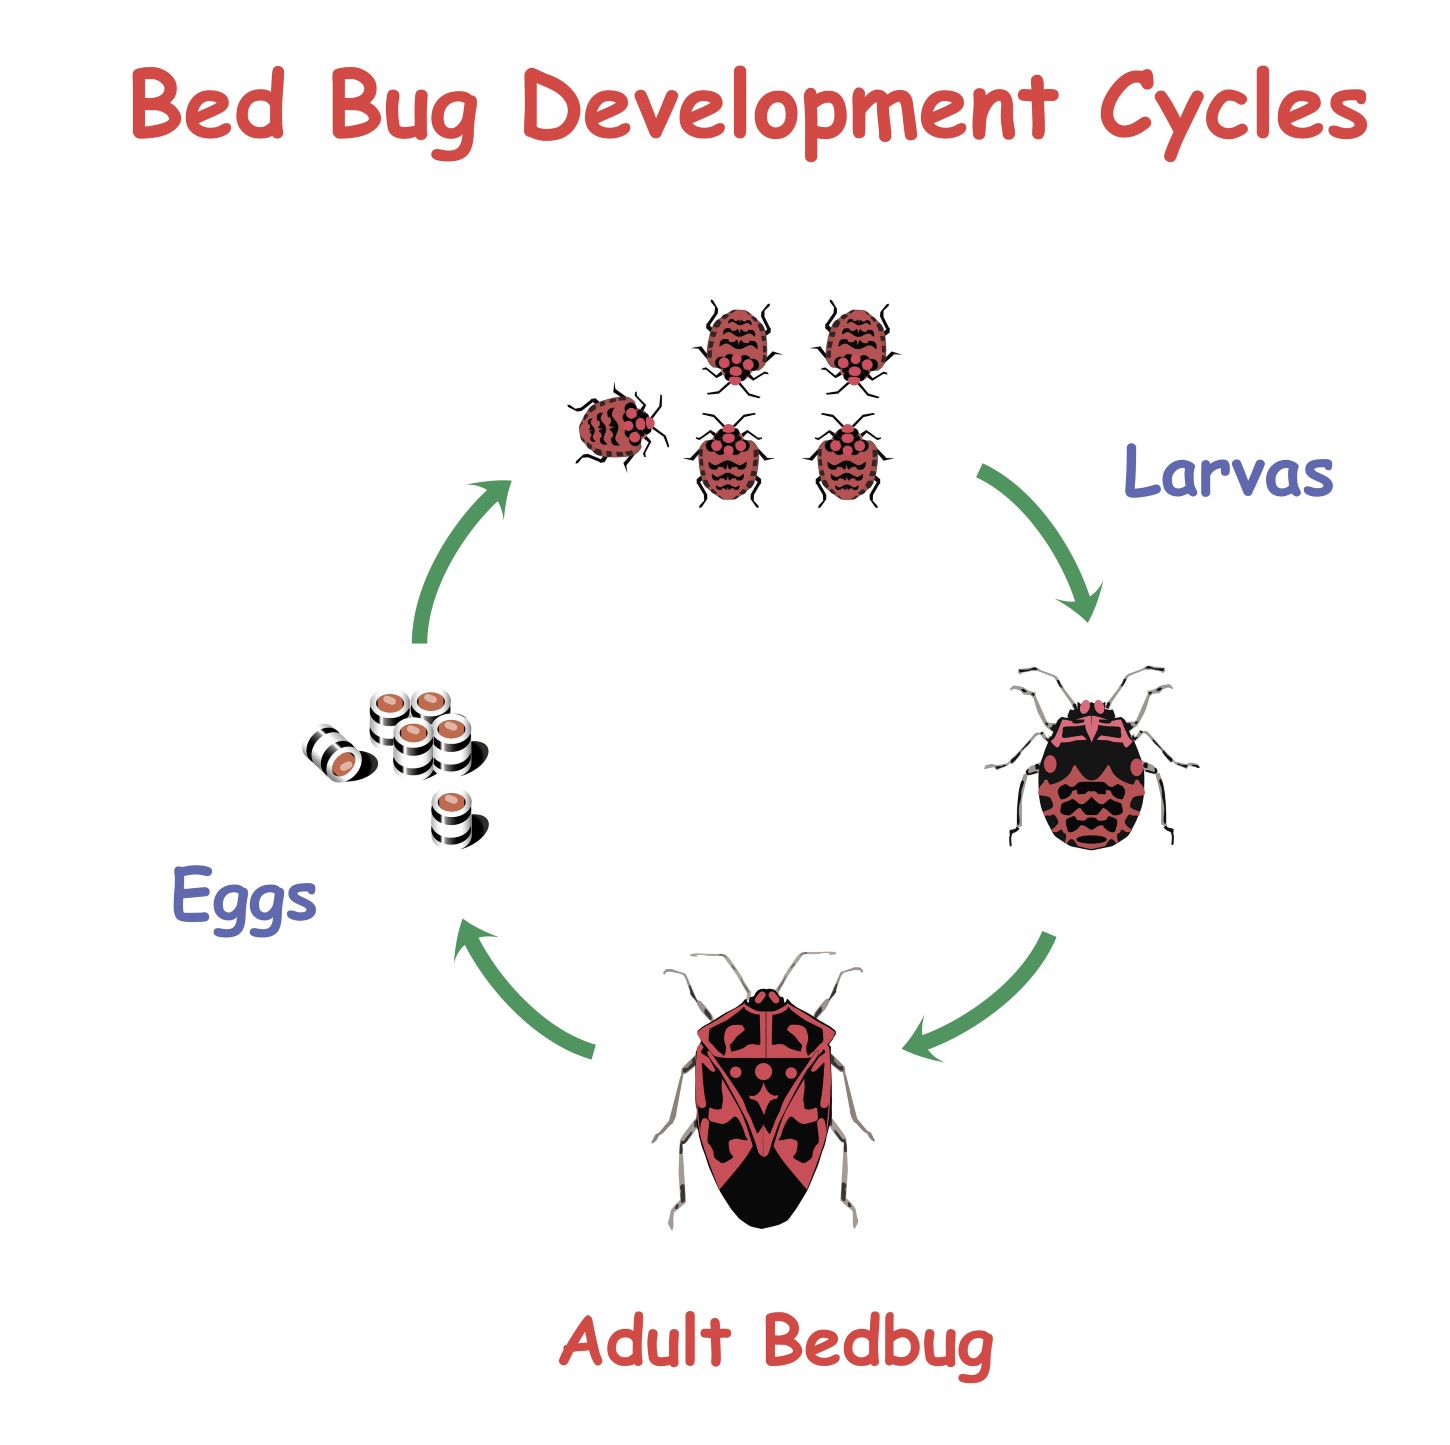 The life cycle of a bed bug